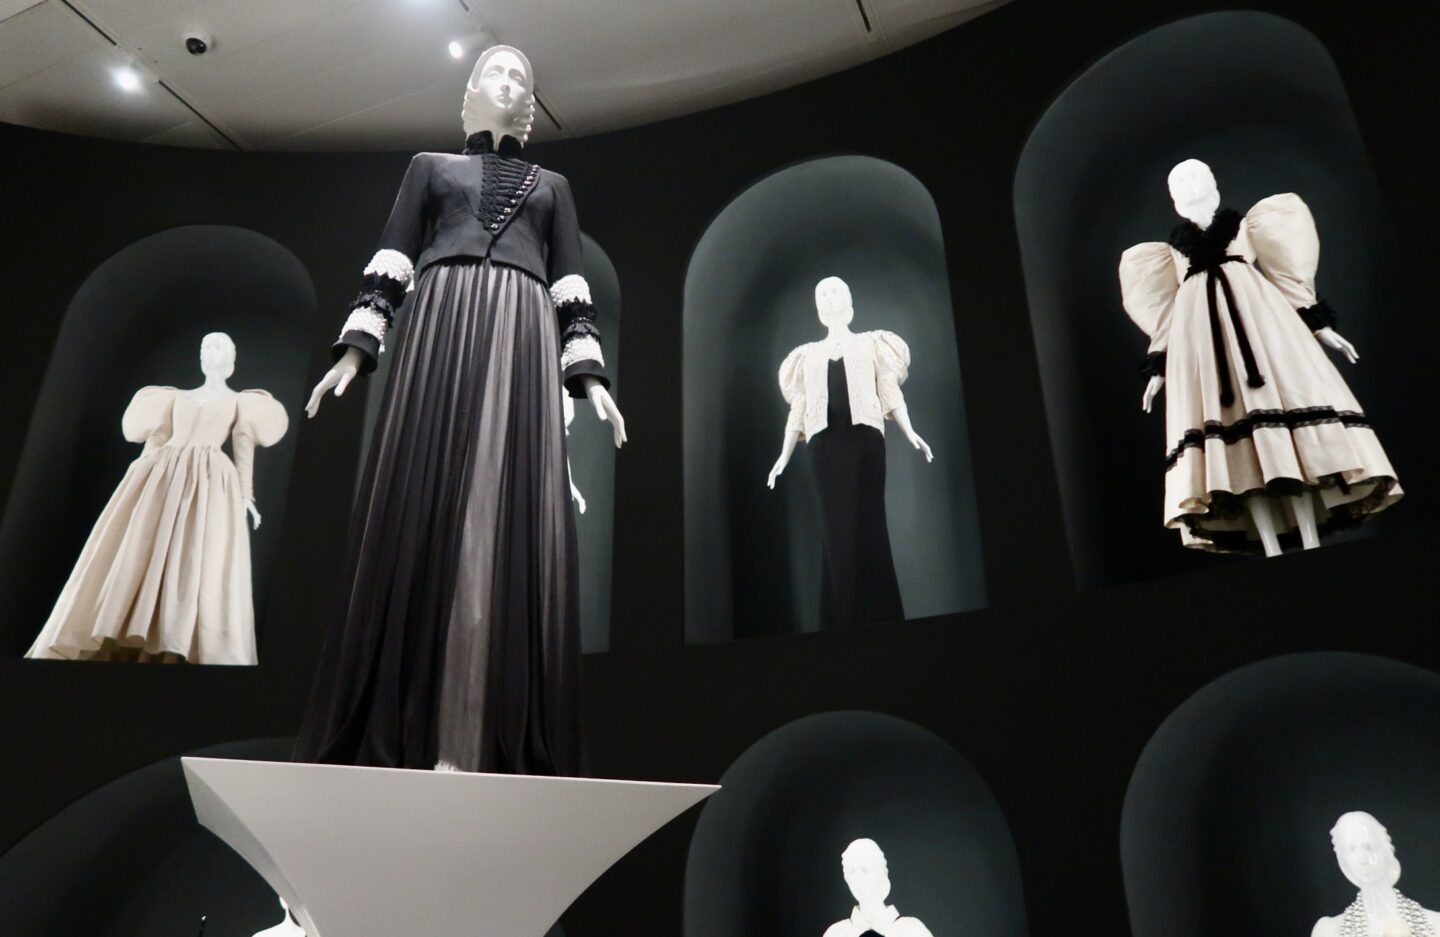 Karl Lagerfeld: A Line of Beauty” at The Met - Kayla's Chaos